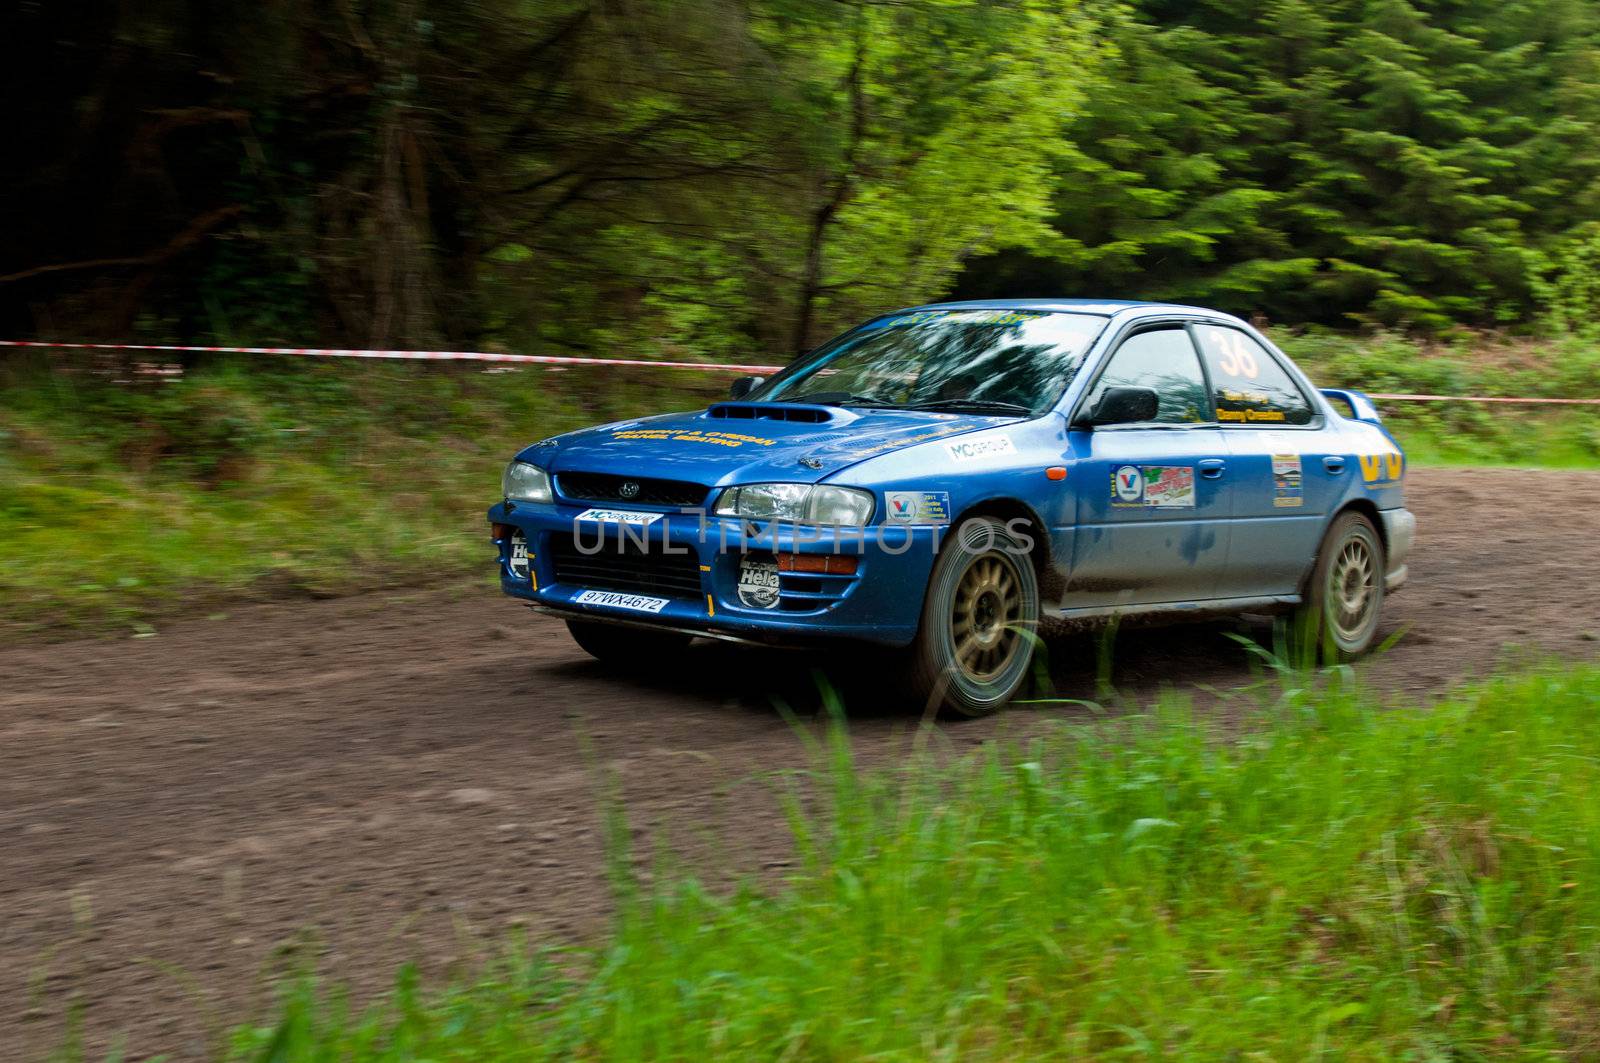 MALLOW, IRELAND - MAY 19: D. Creedon driving Subaru Impreza at the Jim Walsh Cork Forest Rally on May 19, 2012 in Mallow, Ireland. 4th round of the Valvoline National Forest Rally Championship.